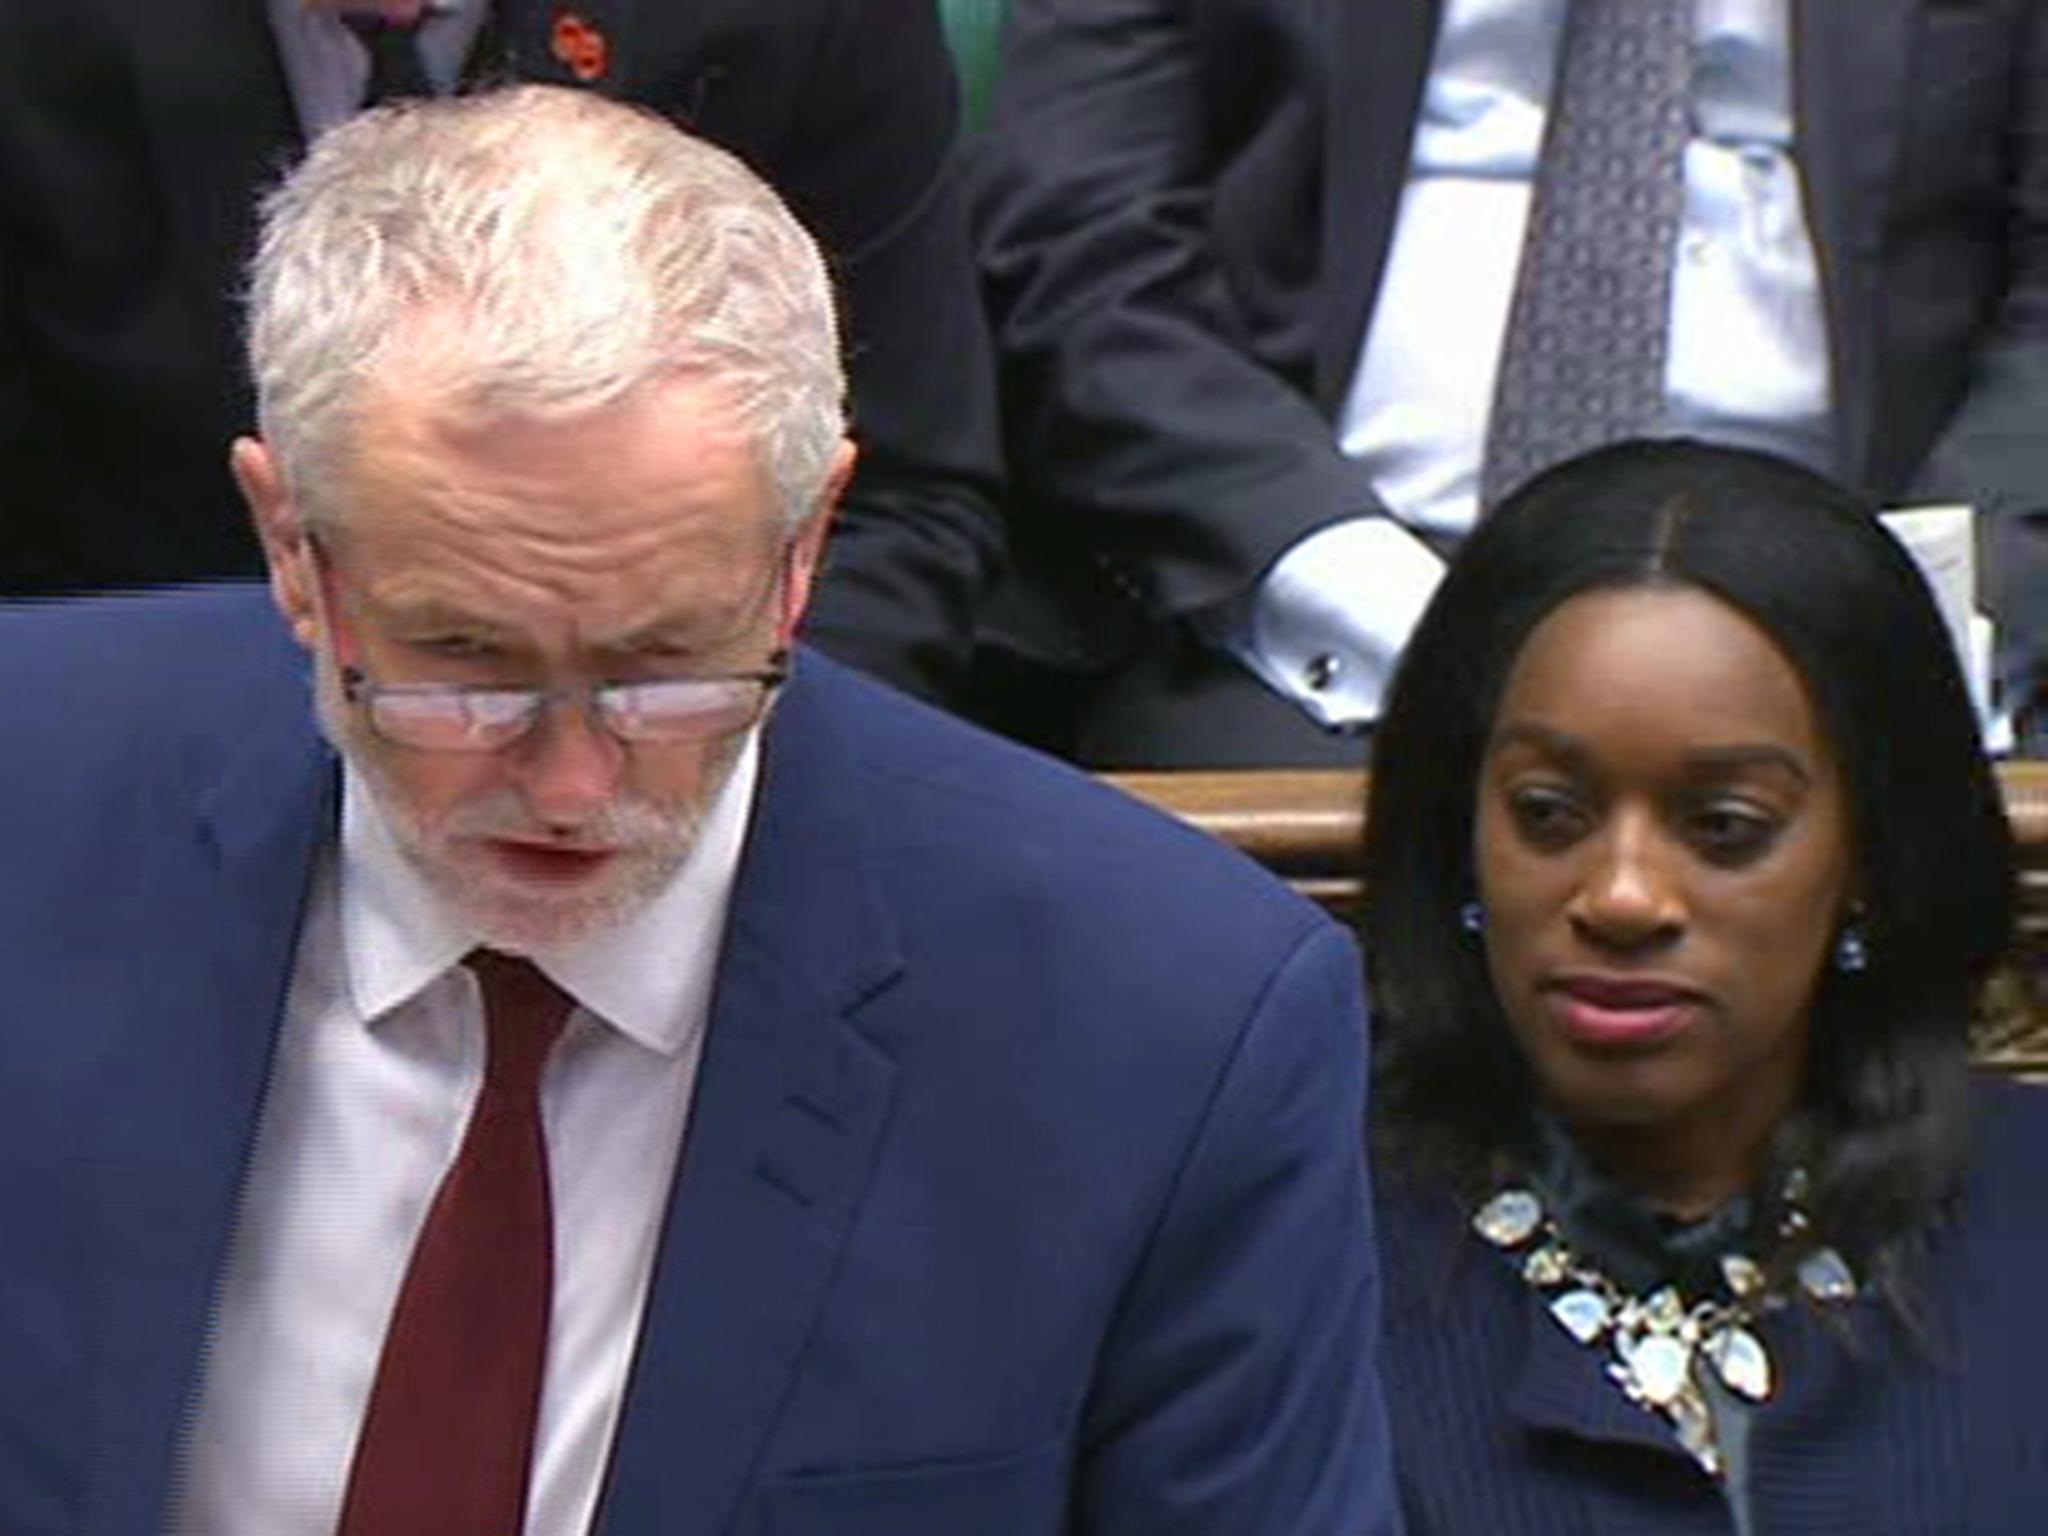 Labour leader Jeremy Corbyn launched a motion this week to stop pupil nationality data collection